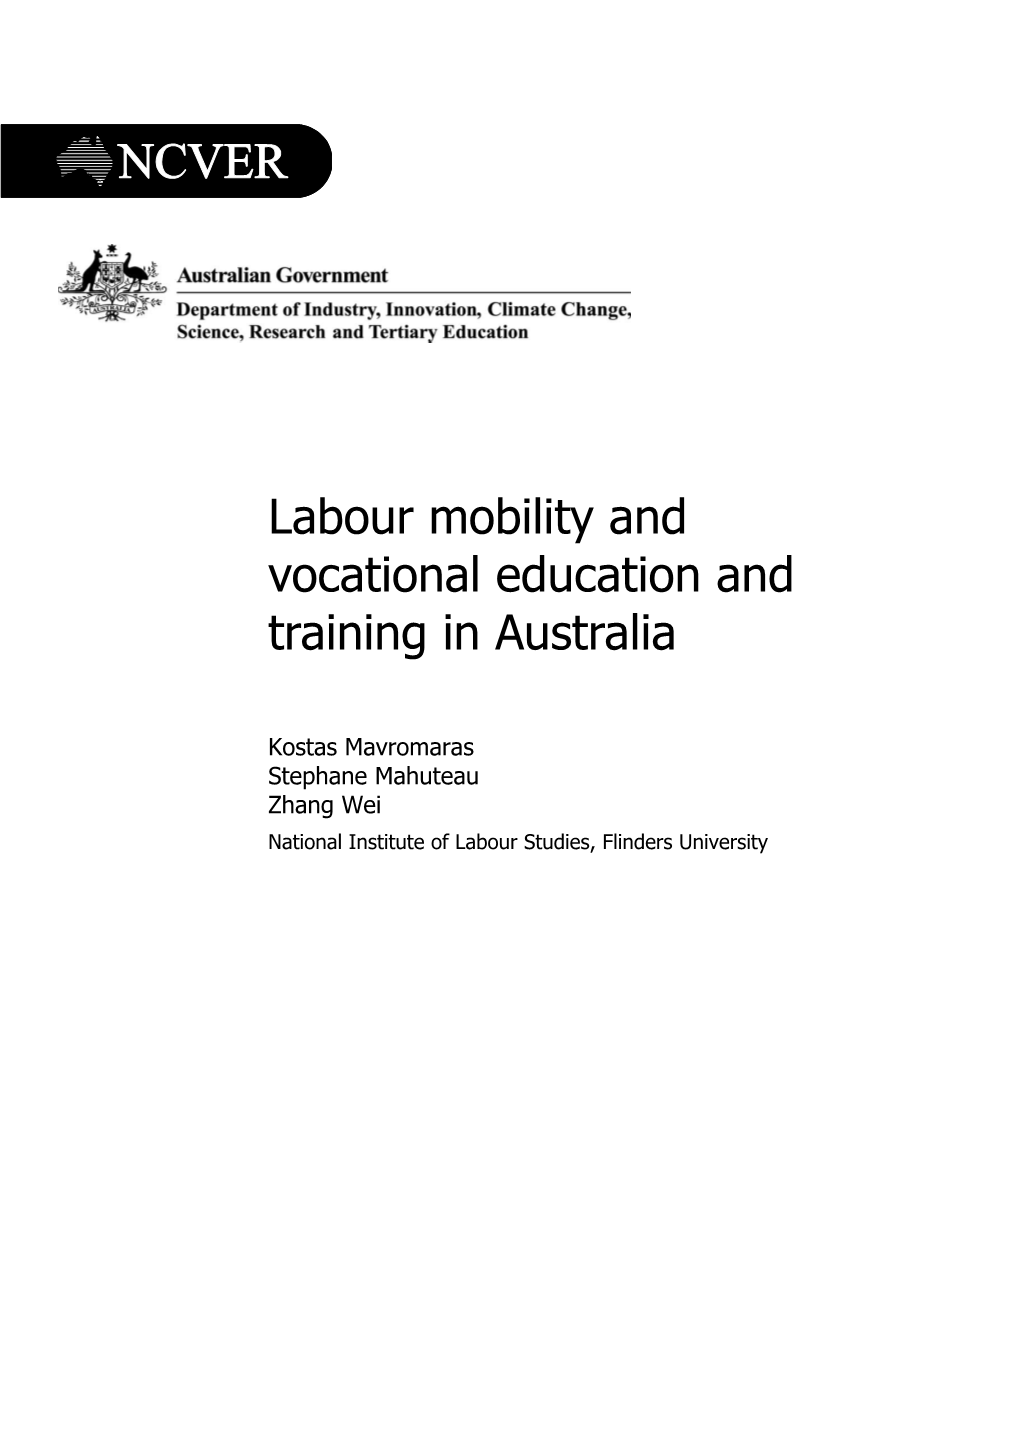 Labour Mobility and Vocational Education and Training in Australia